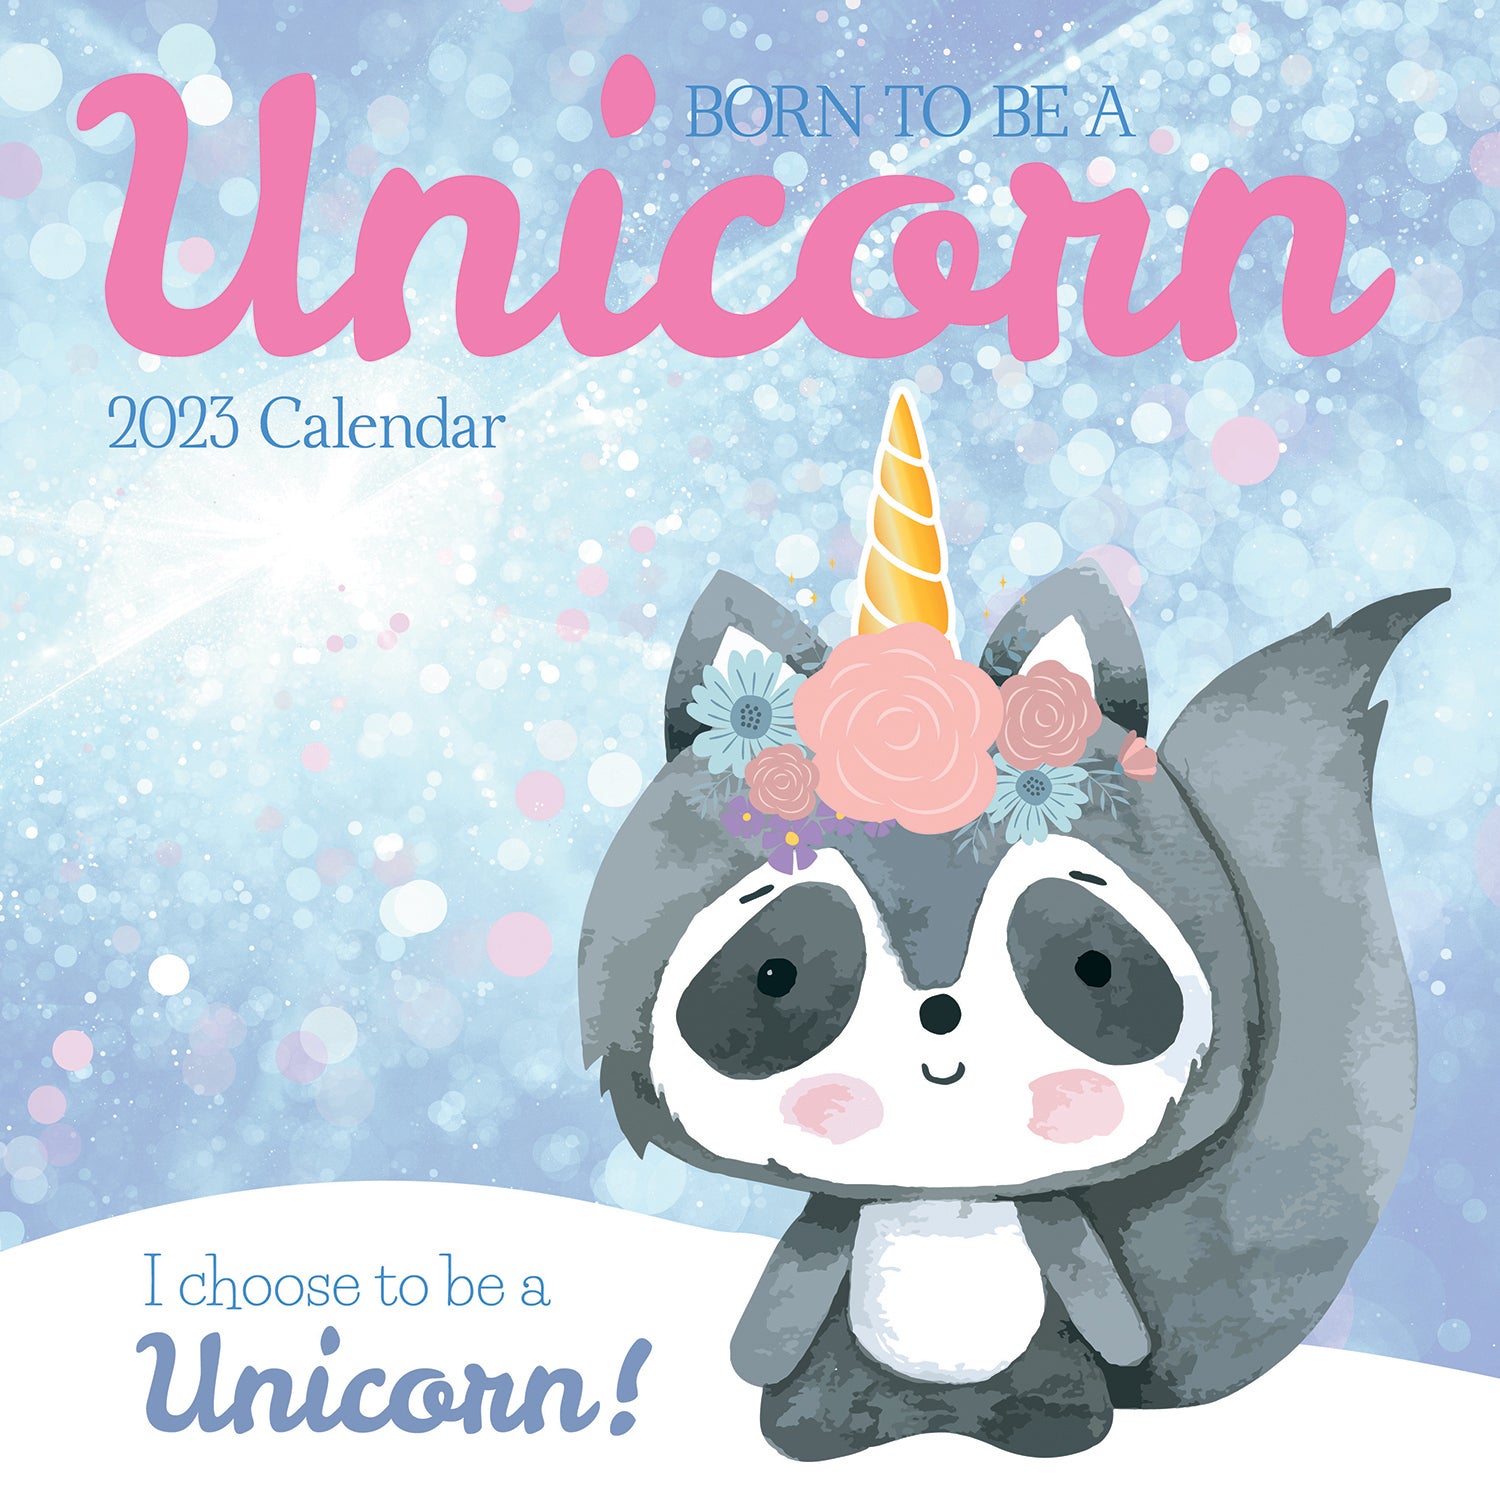 Born to be a Unicorn - 2023 Square Wall Calendar 16 Months Planner New Year Gift - Zmart Australia